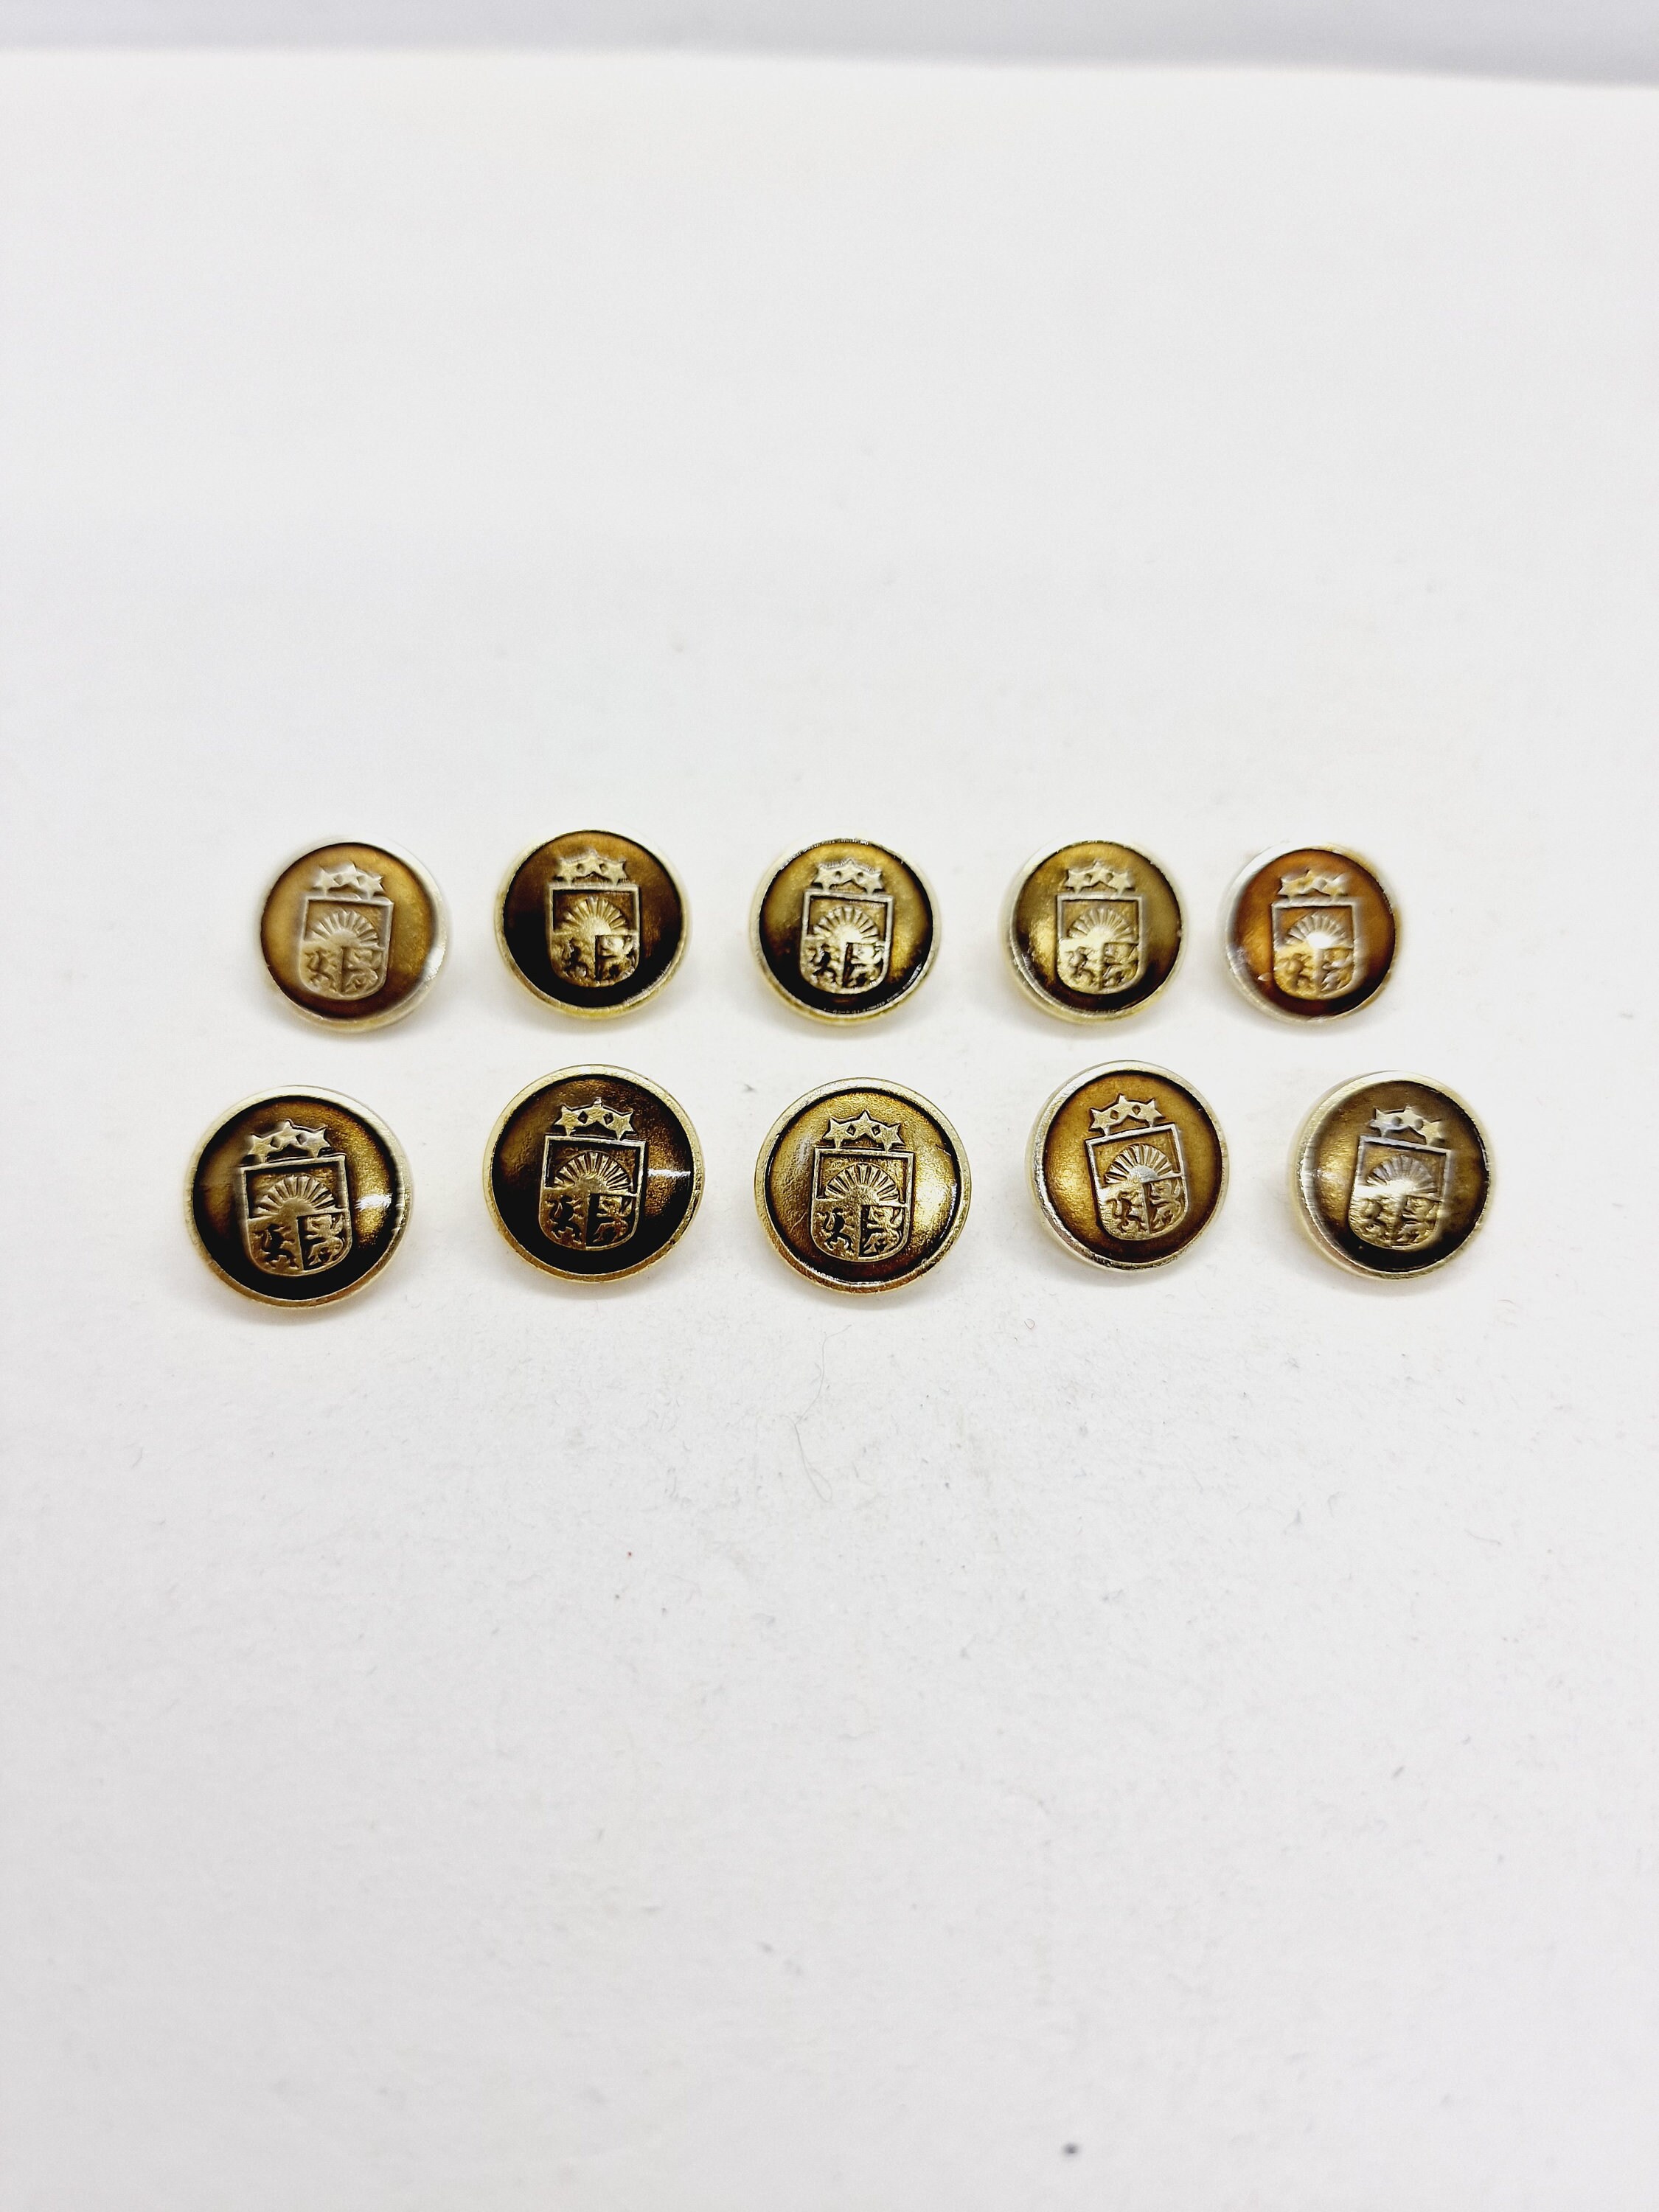 10-100 BUTTONS FROM THE SOVIET UNION. 22MM. GOLD ANCHOR, MARINE, NAVY